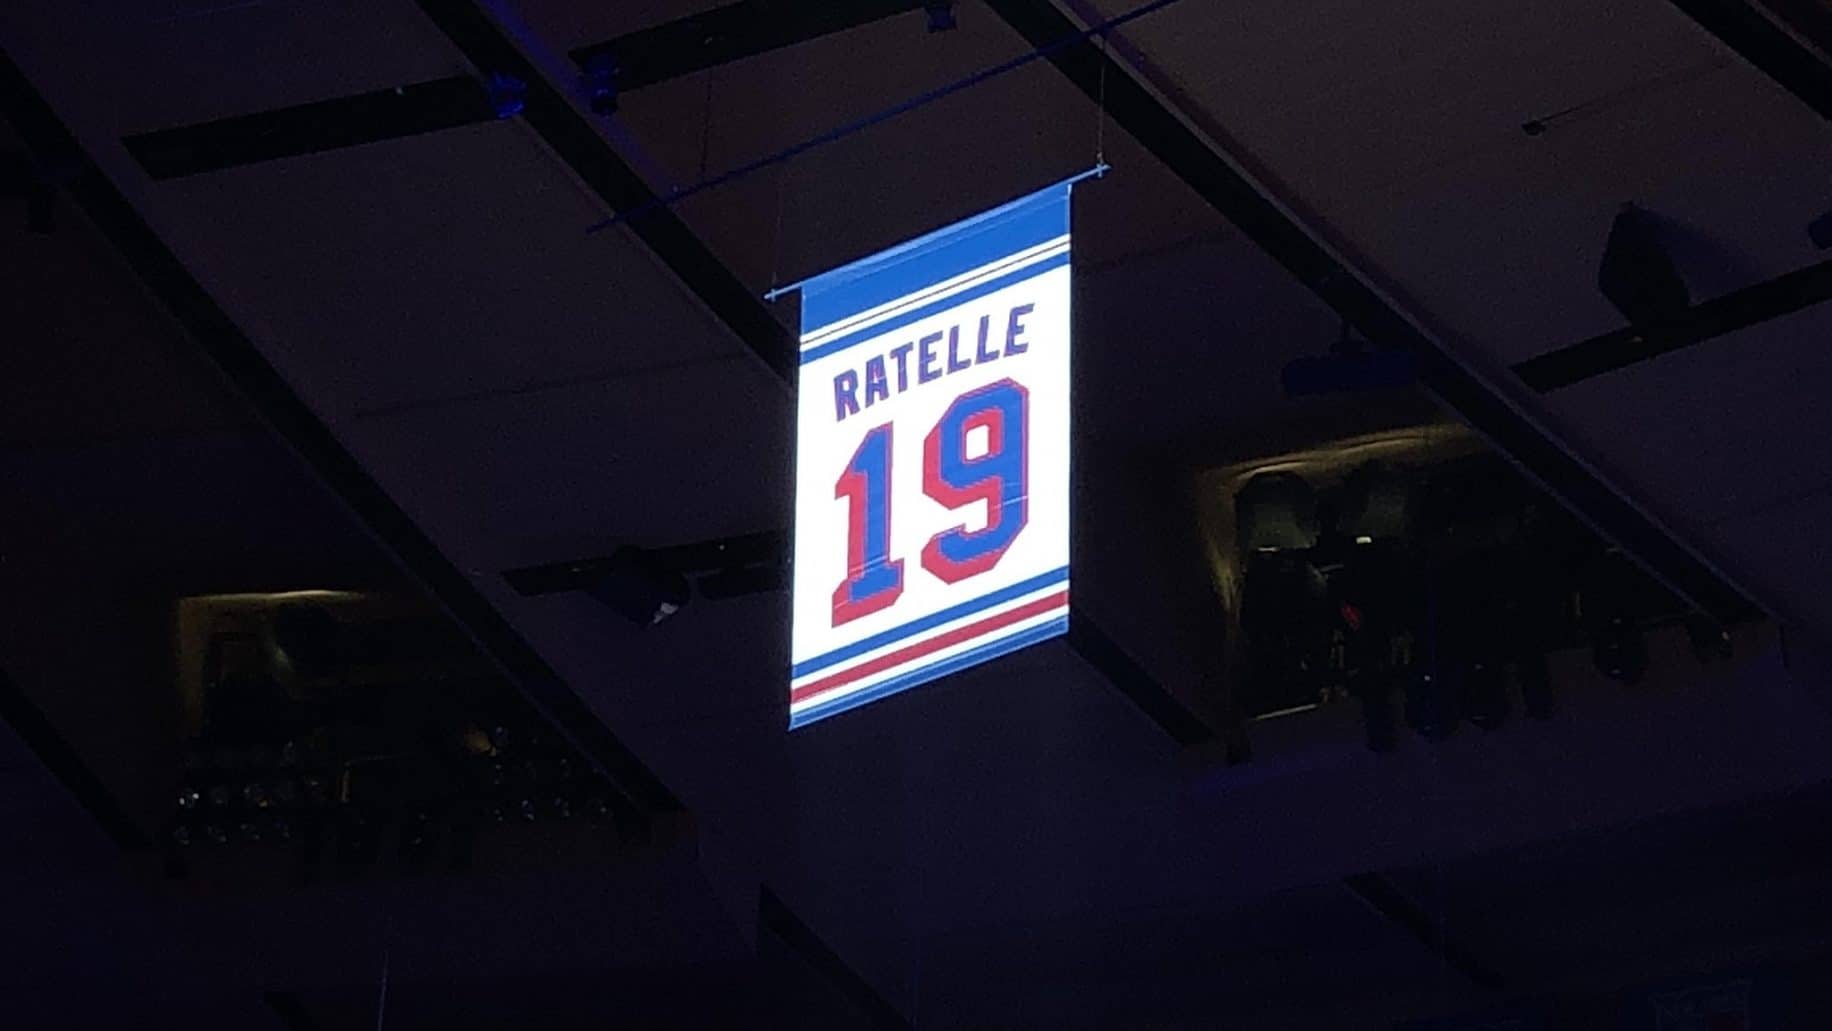 ny rangers retired numbers